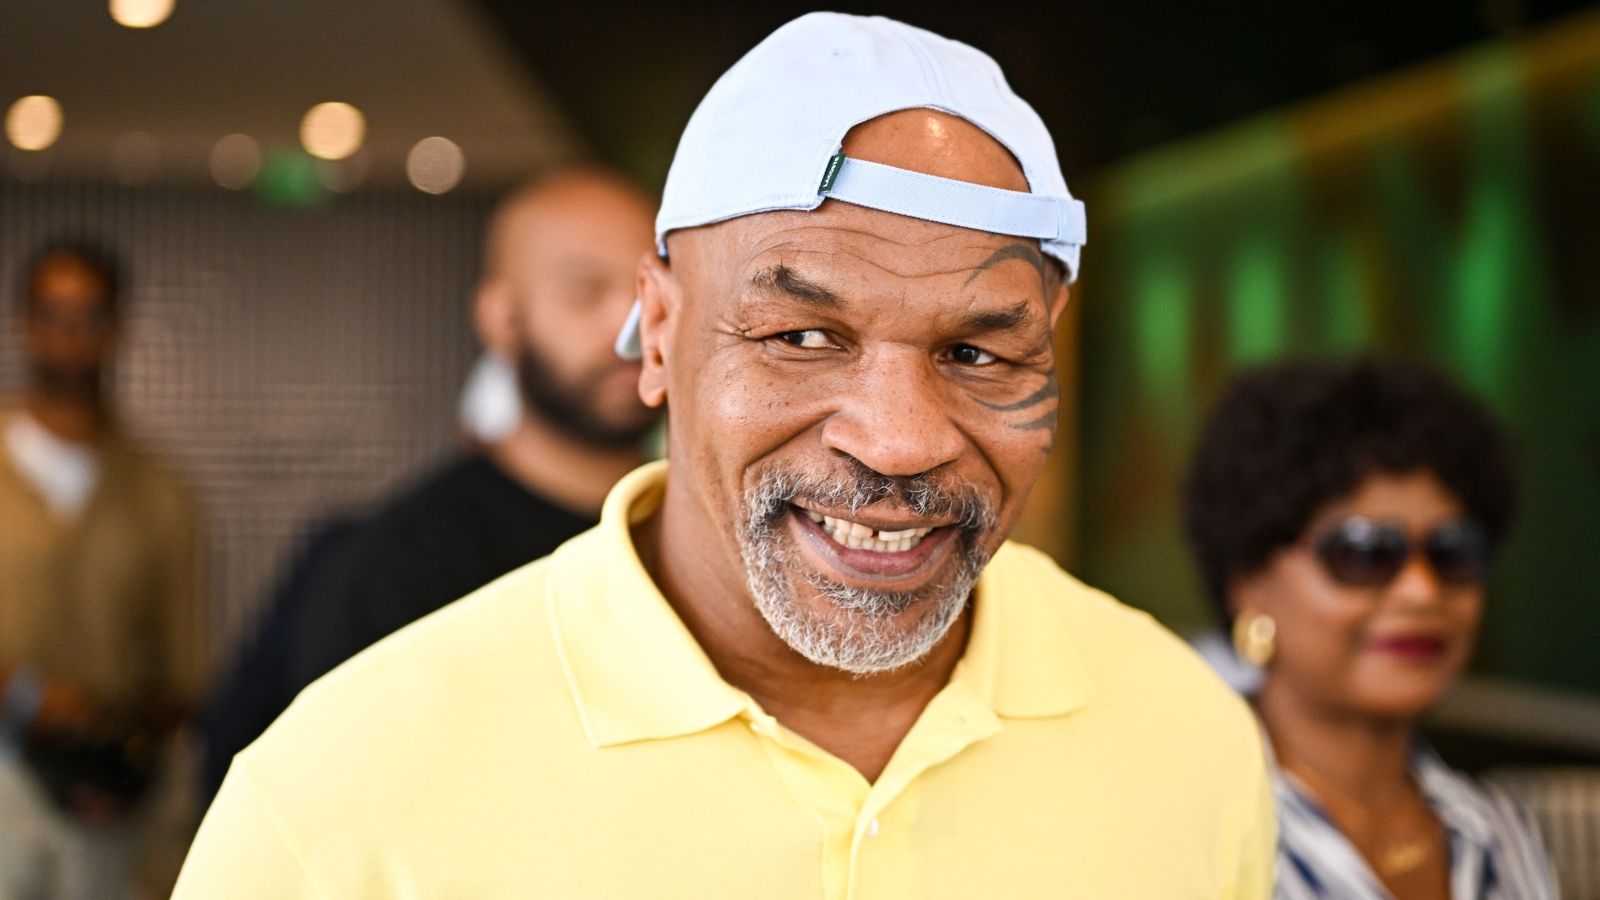 Mike Tyson smiling in a yellow shirt